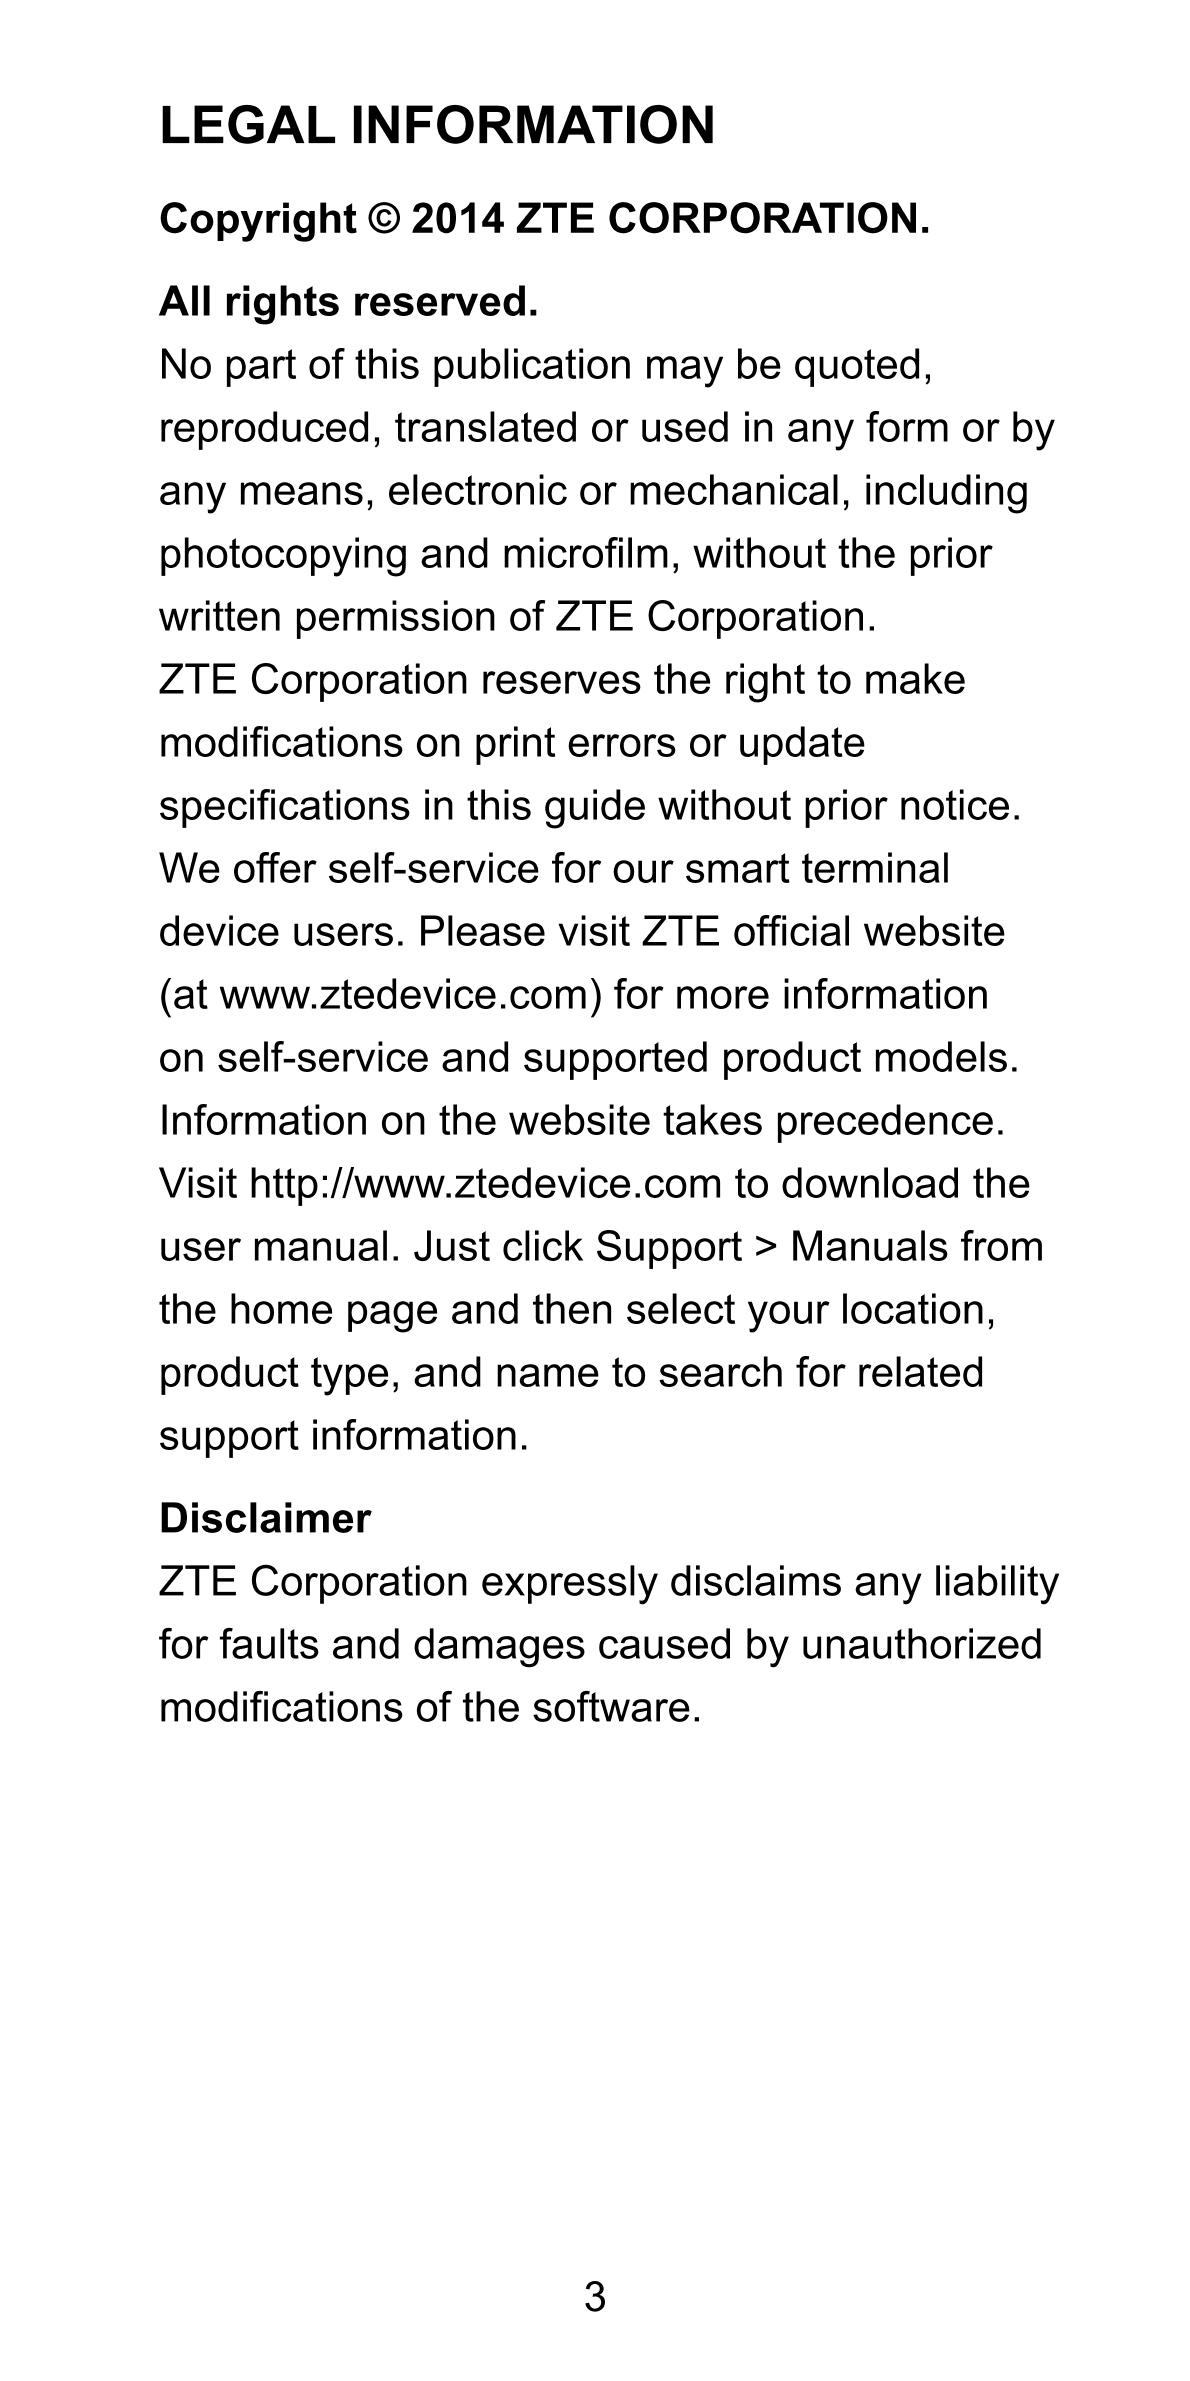 LEGAL INFORMATION
Copyright © 2014 ZTE CORPORATION.
All rights reserved.
No part of this publication may be quoted, 
reproduced,